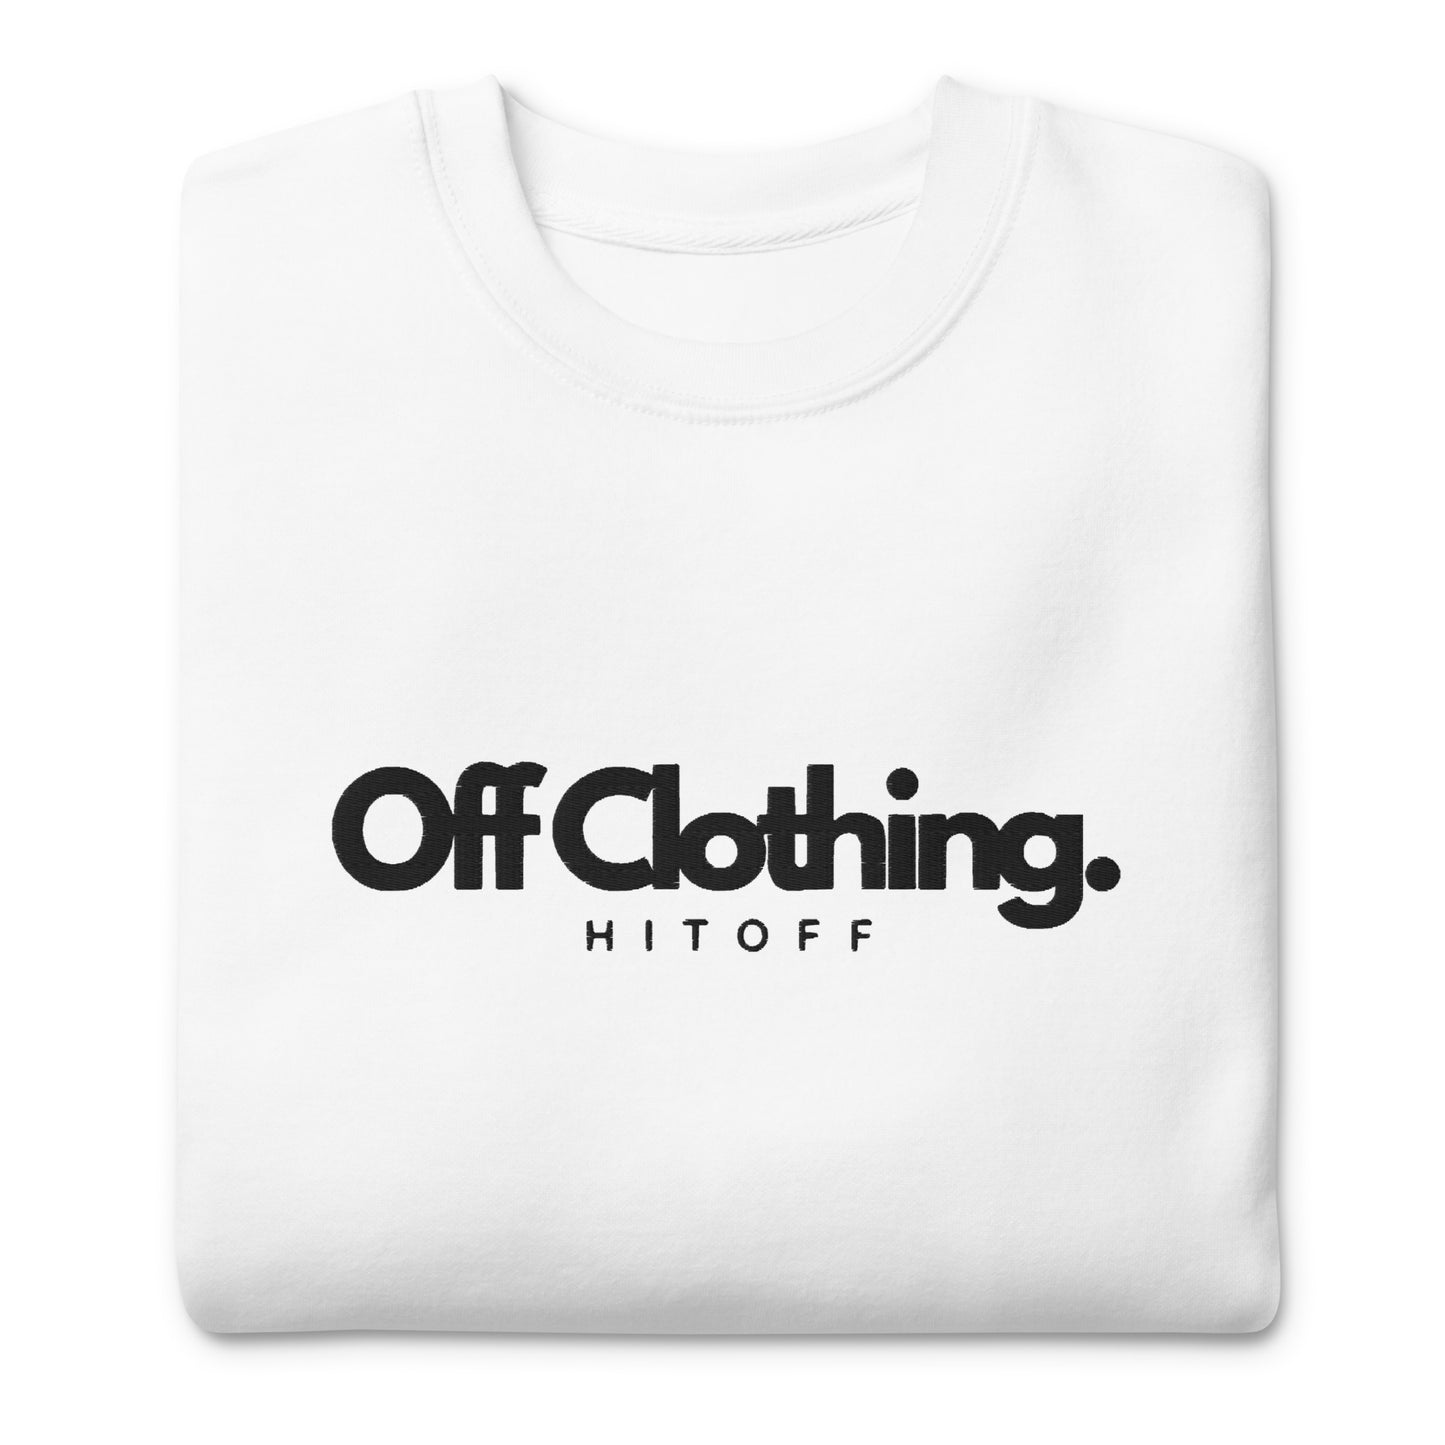 "OFF RELEASE" (LIMITED)